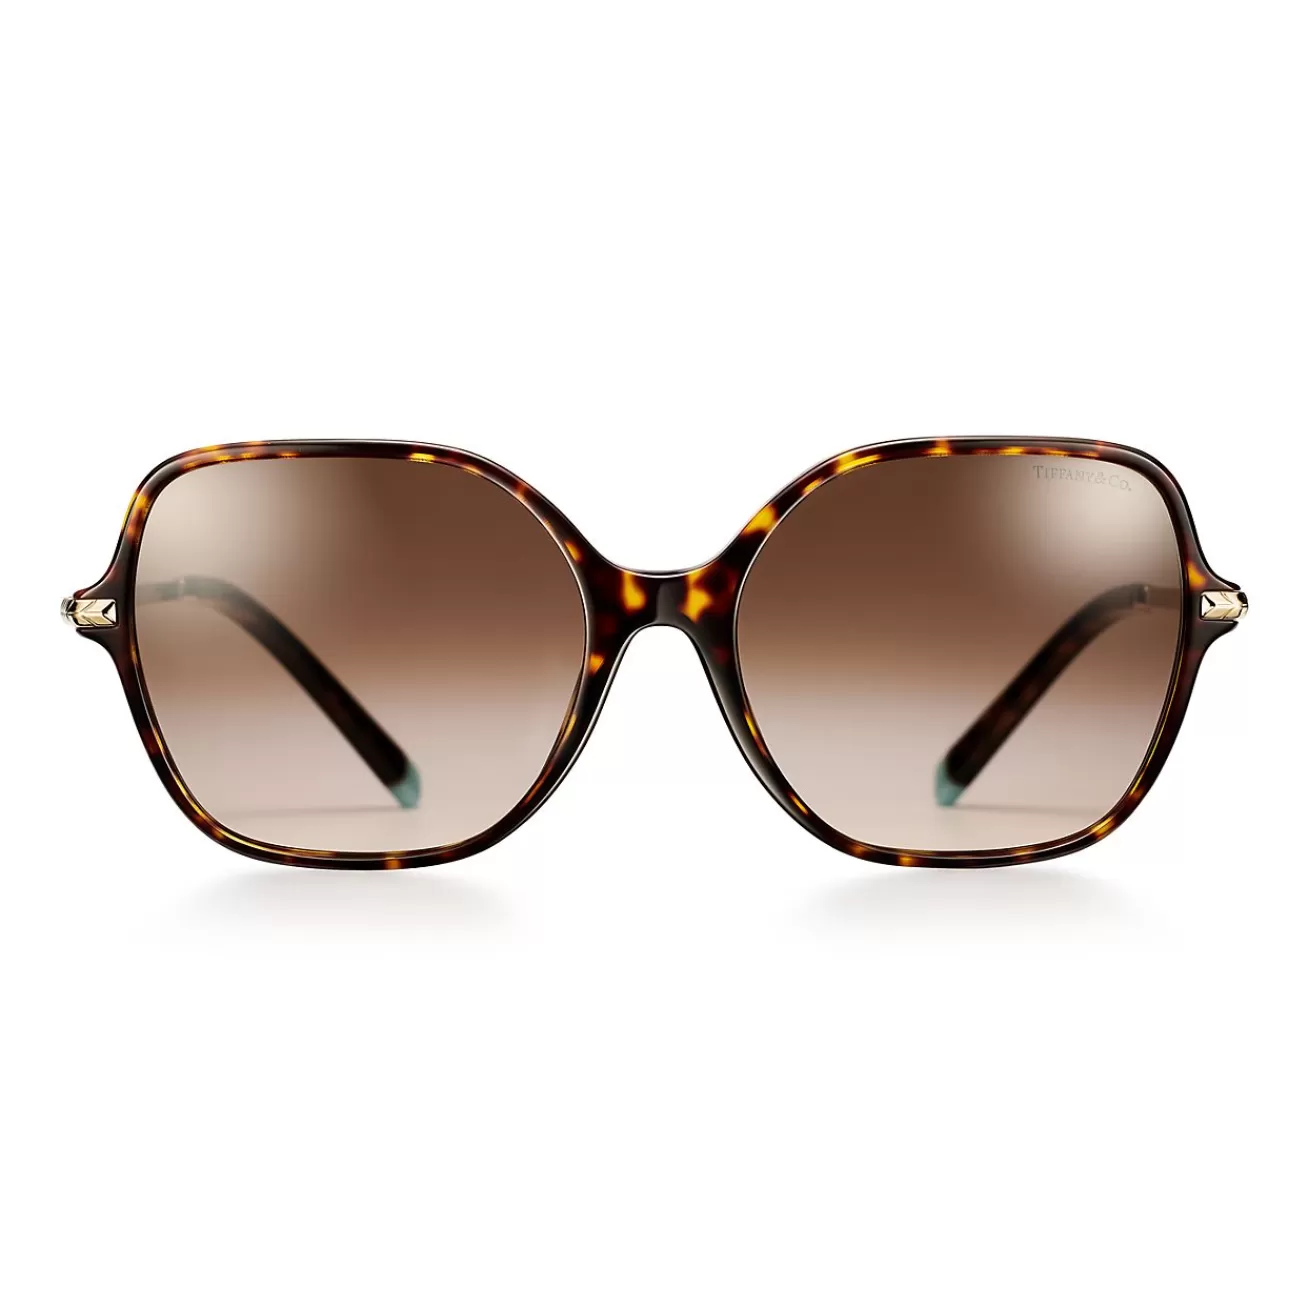 Tiffany & Co. Wheat Leaf Sunglasses in Tortoise Acetate with Gradient Brown Lenses | ^ Sunglasses